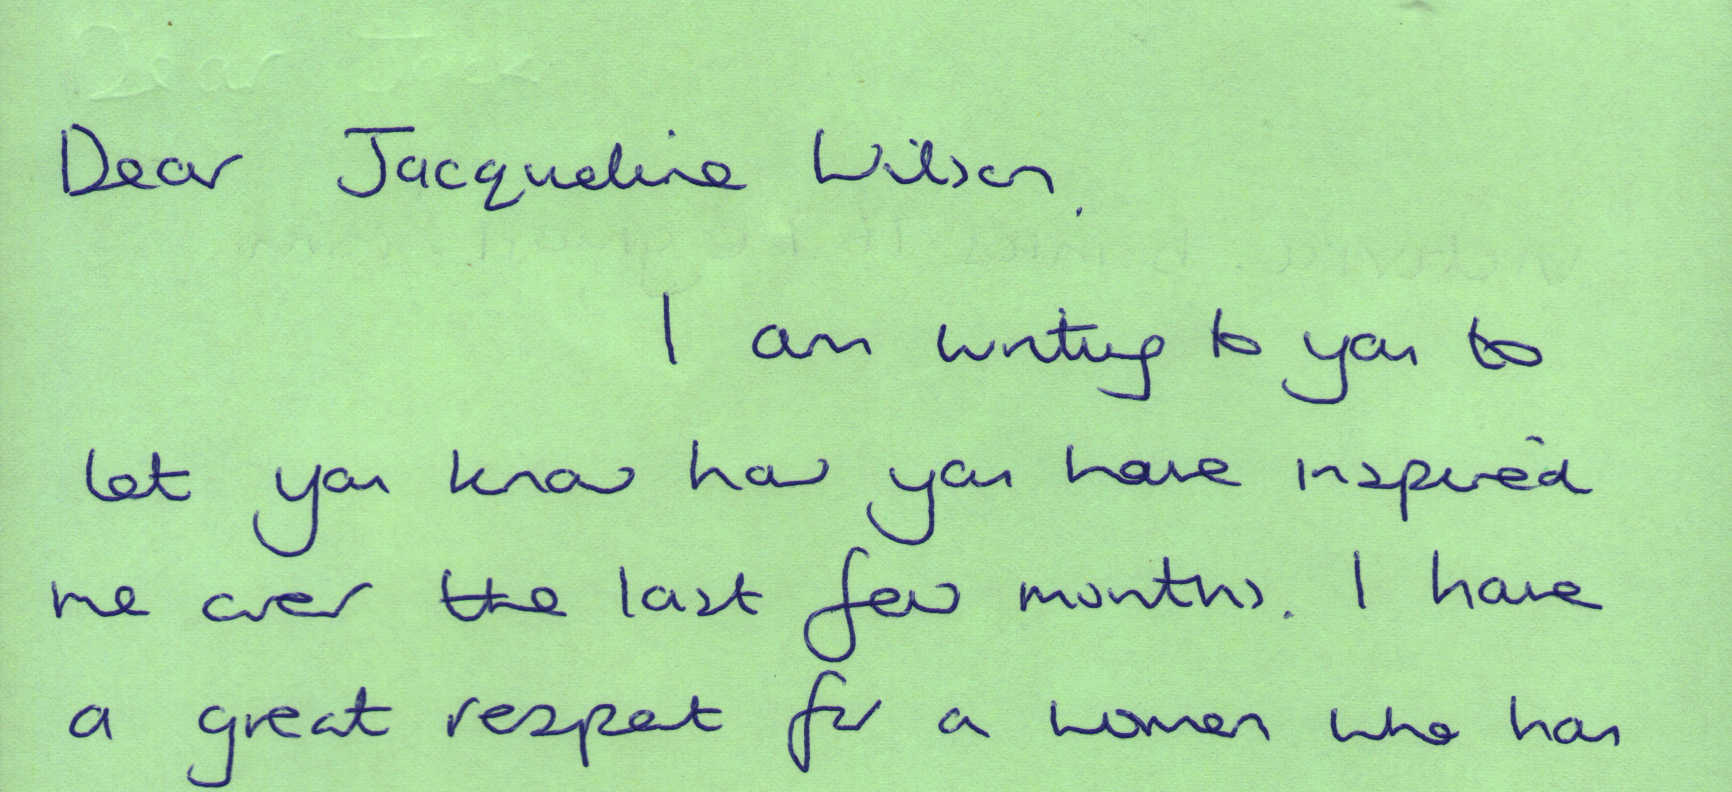 Letter to Jacqueline Wilson from Victoria Banks